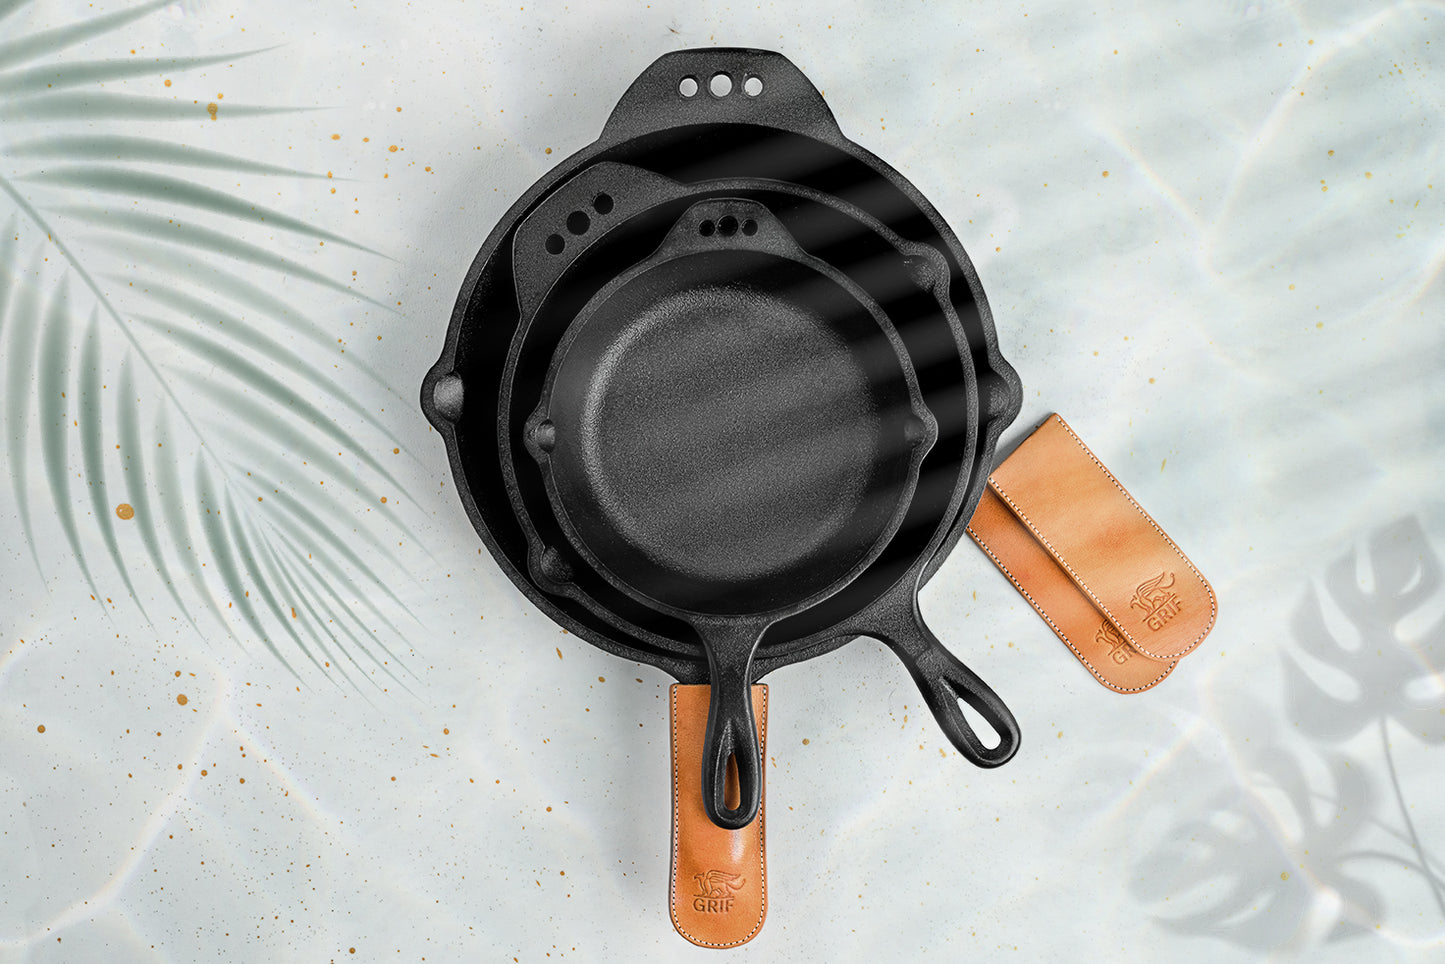 SUNRISE ☀️ 3 CAST IRON SKILLETS AND 3 LEATHER HANDLE COVERS